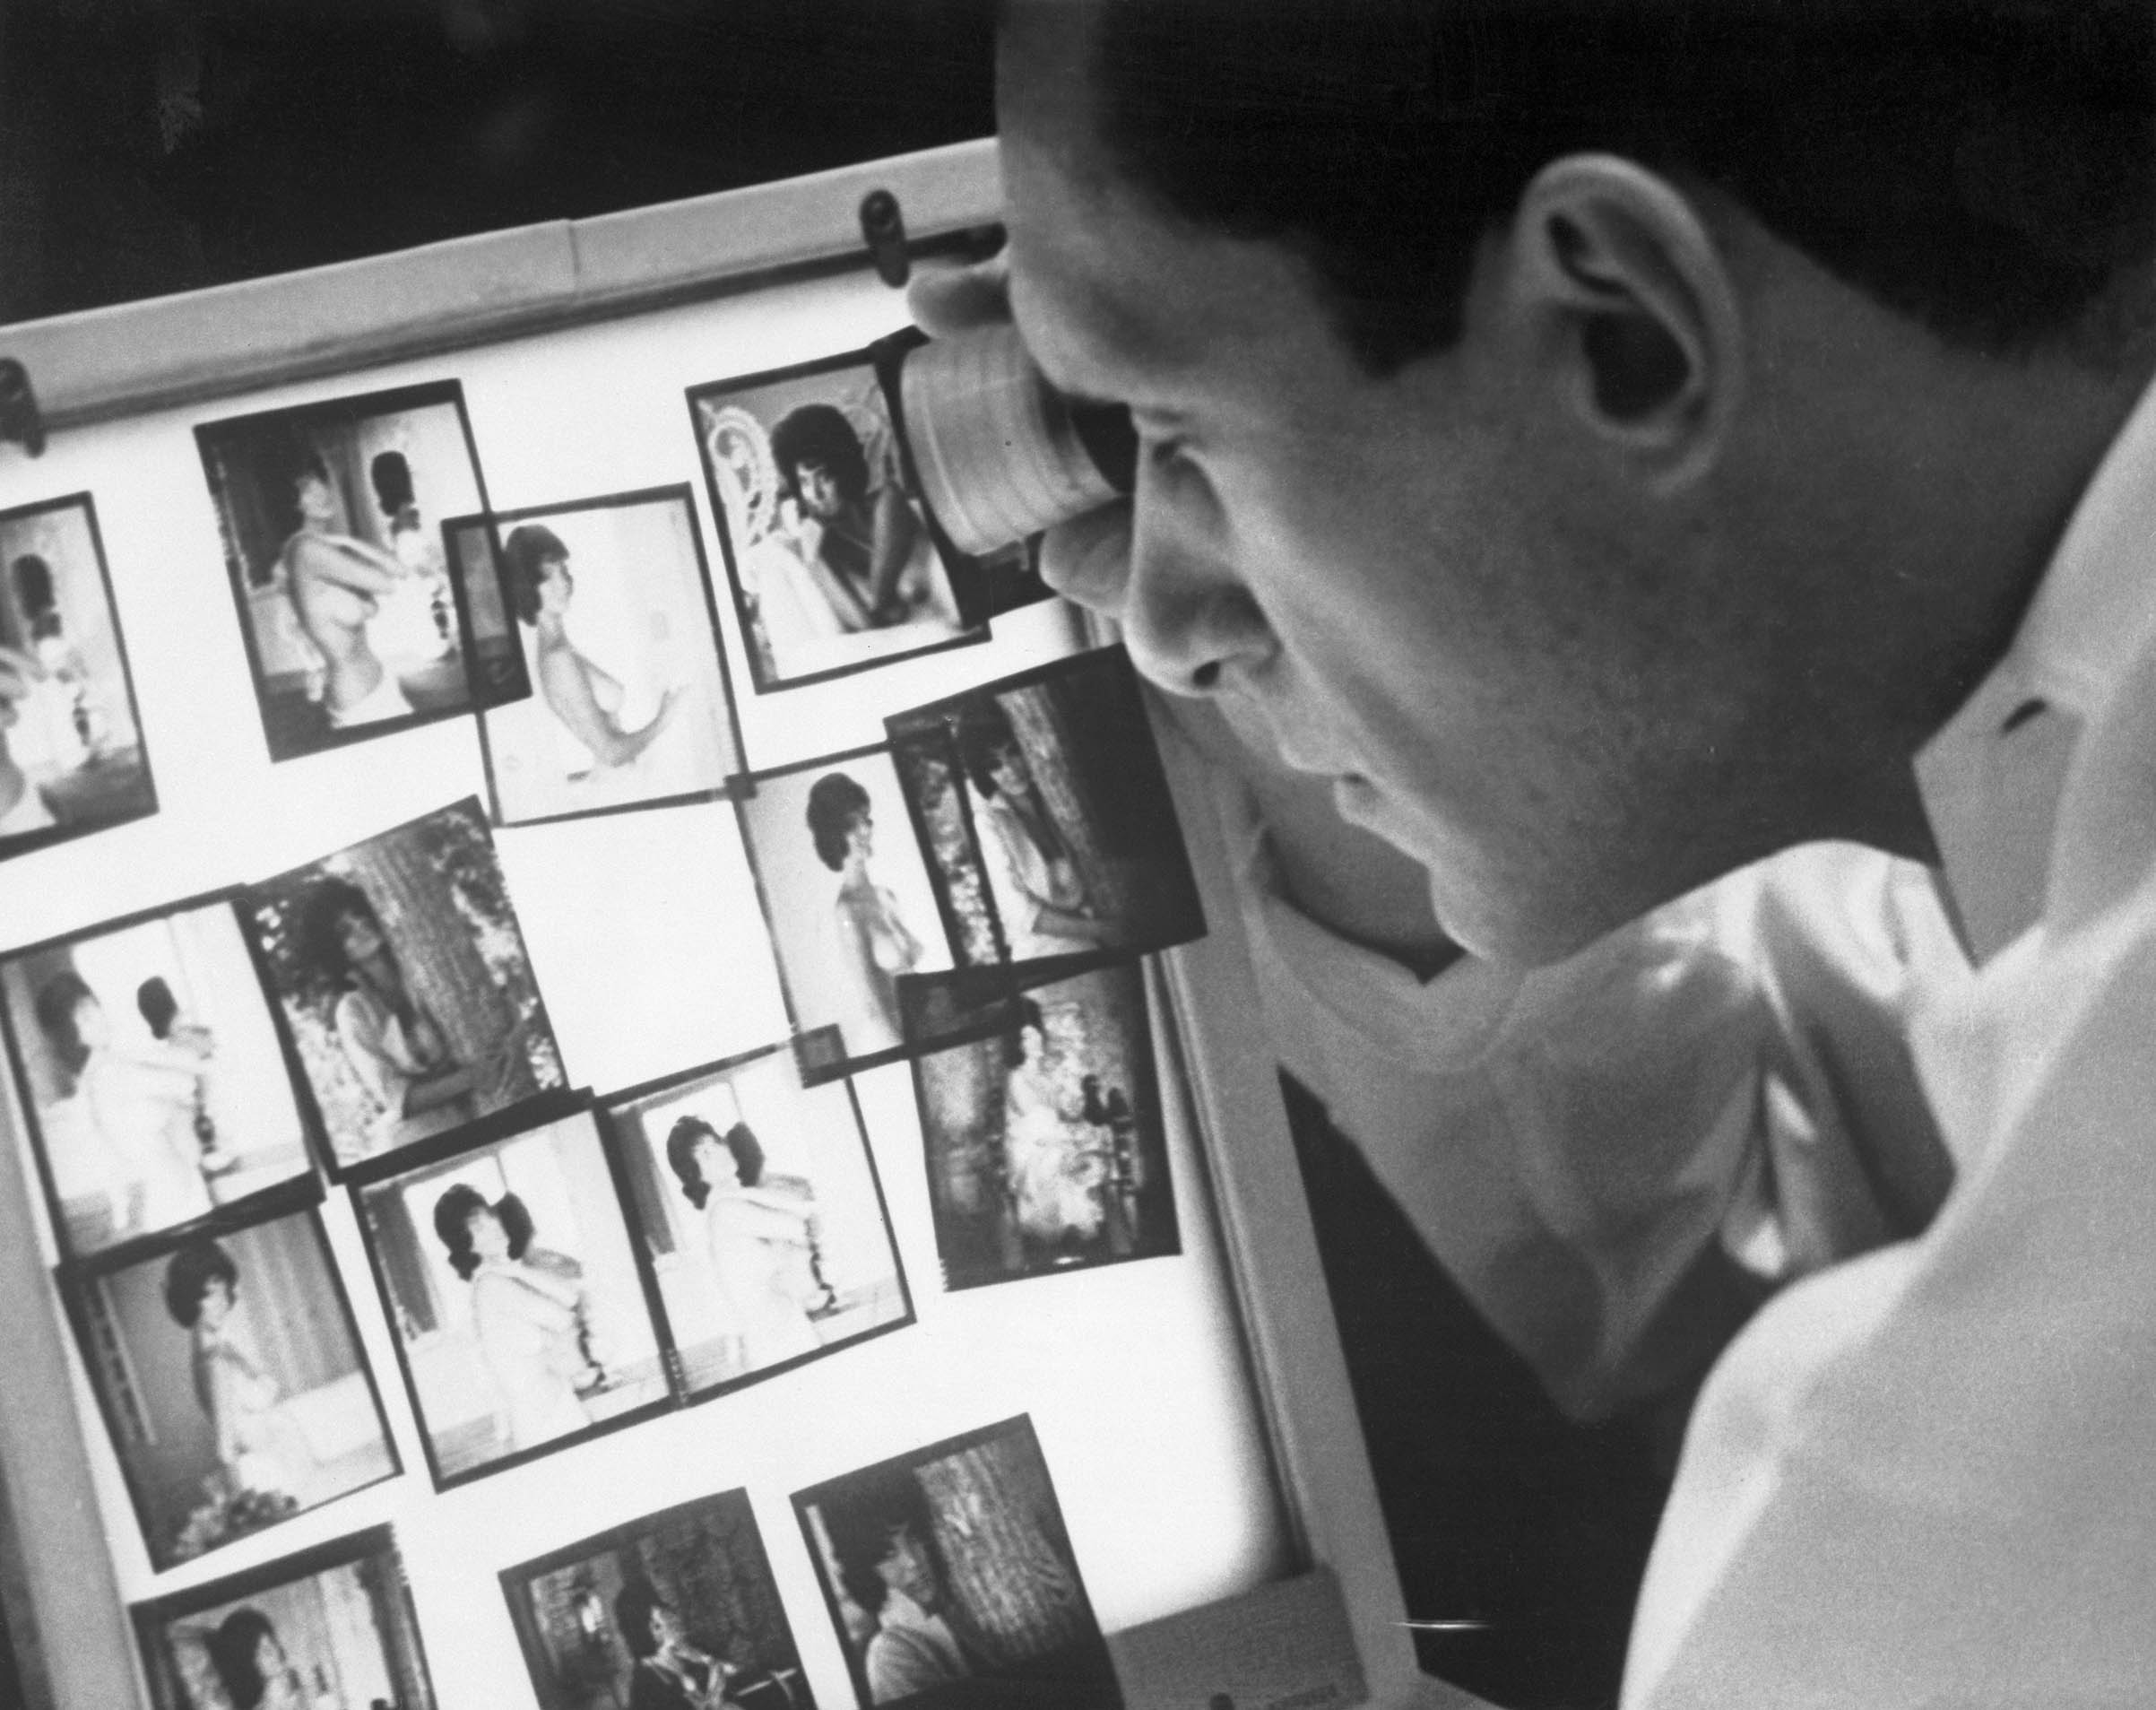 Hugh Hefner views photographs in his Chicago office. (Bettmann Archive/Getty Images)